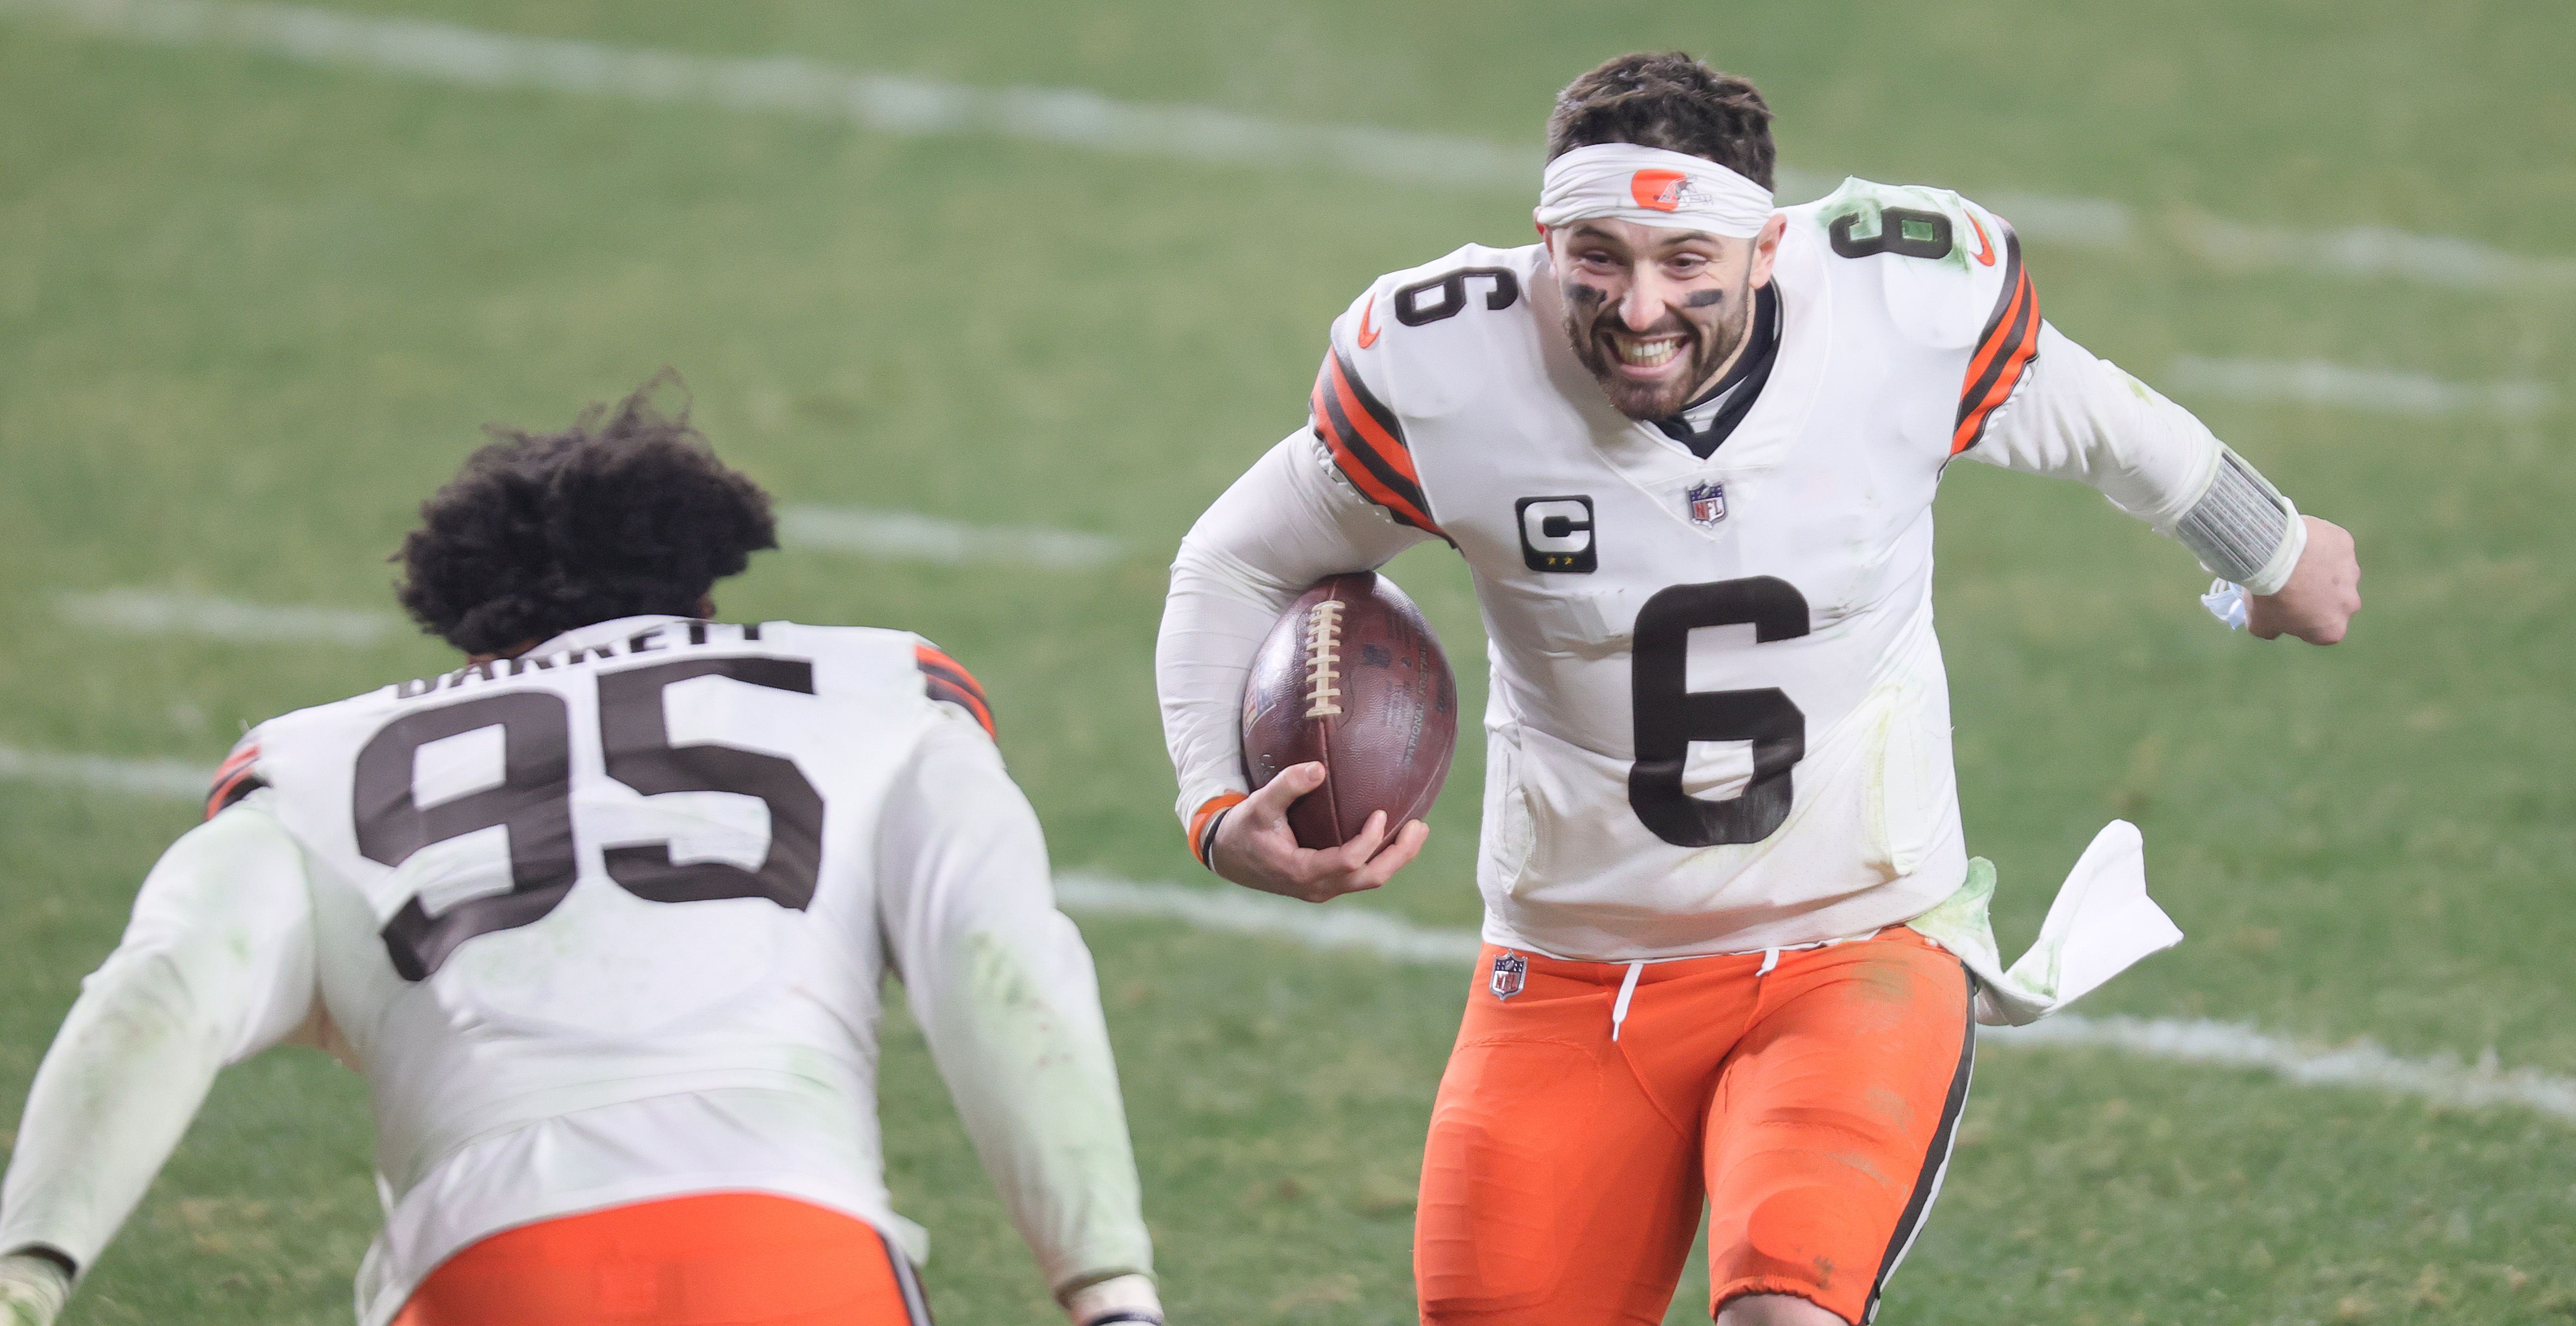 Browns-Steelers playoff game delivers huge ratings for NBC